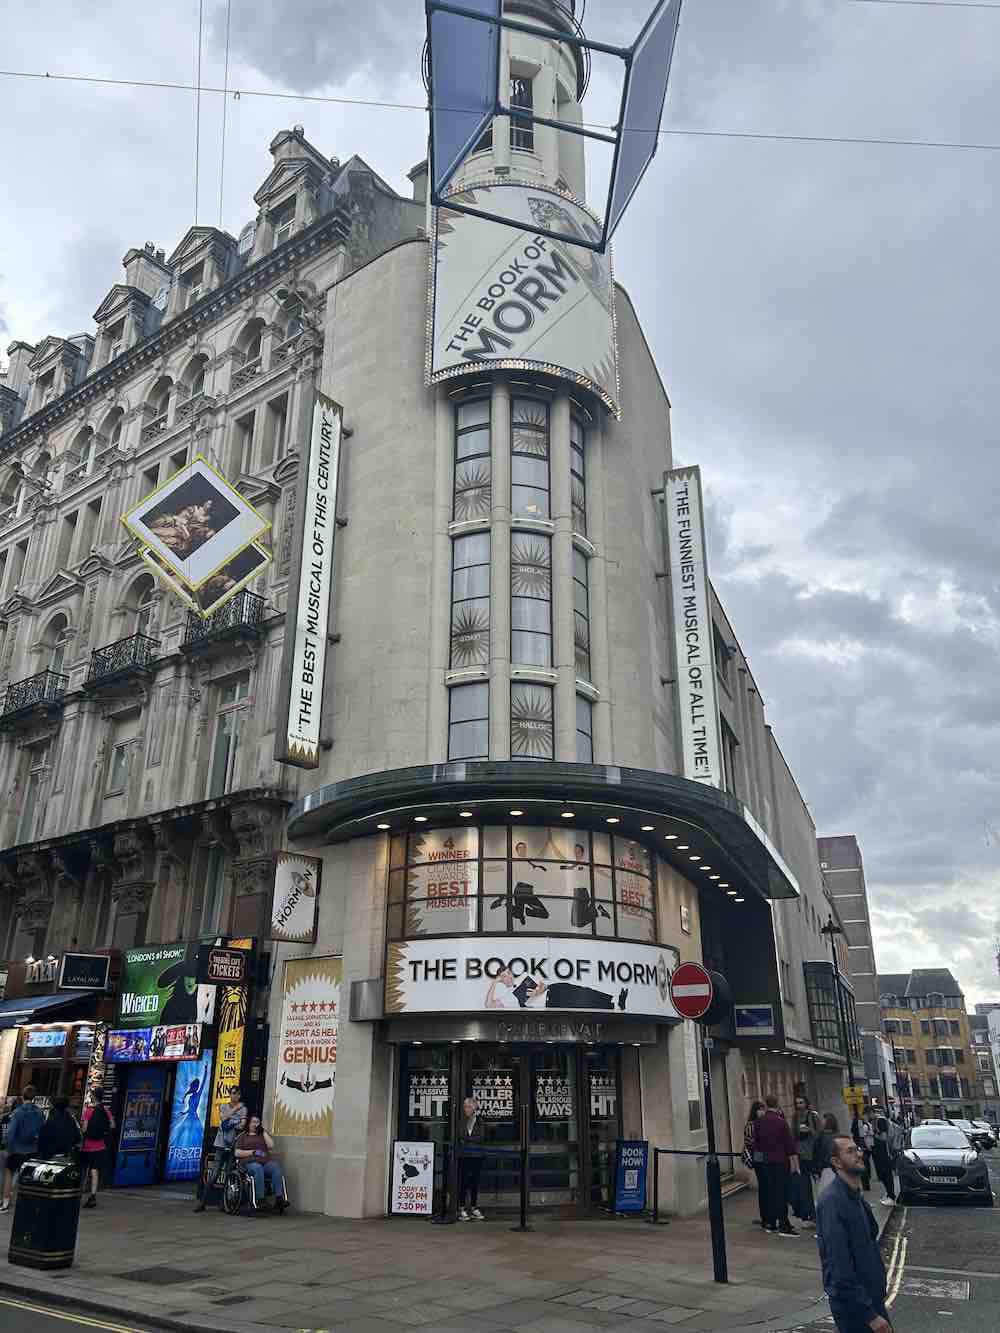 UK Aug 23 Day 5 – Another West End show